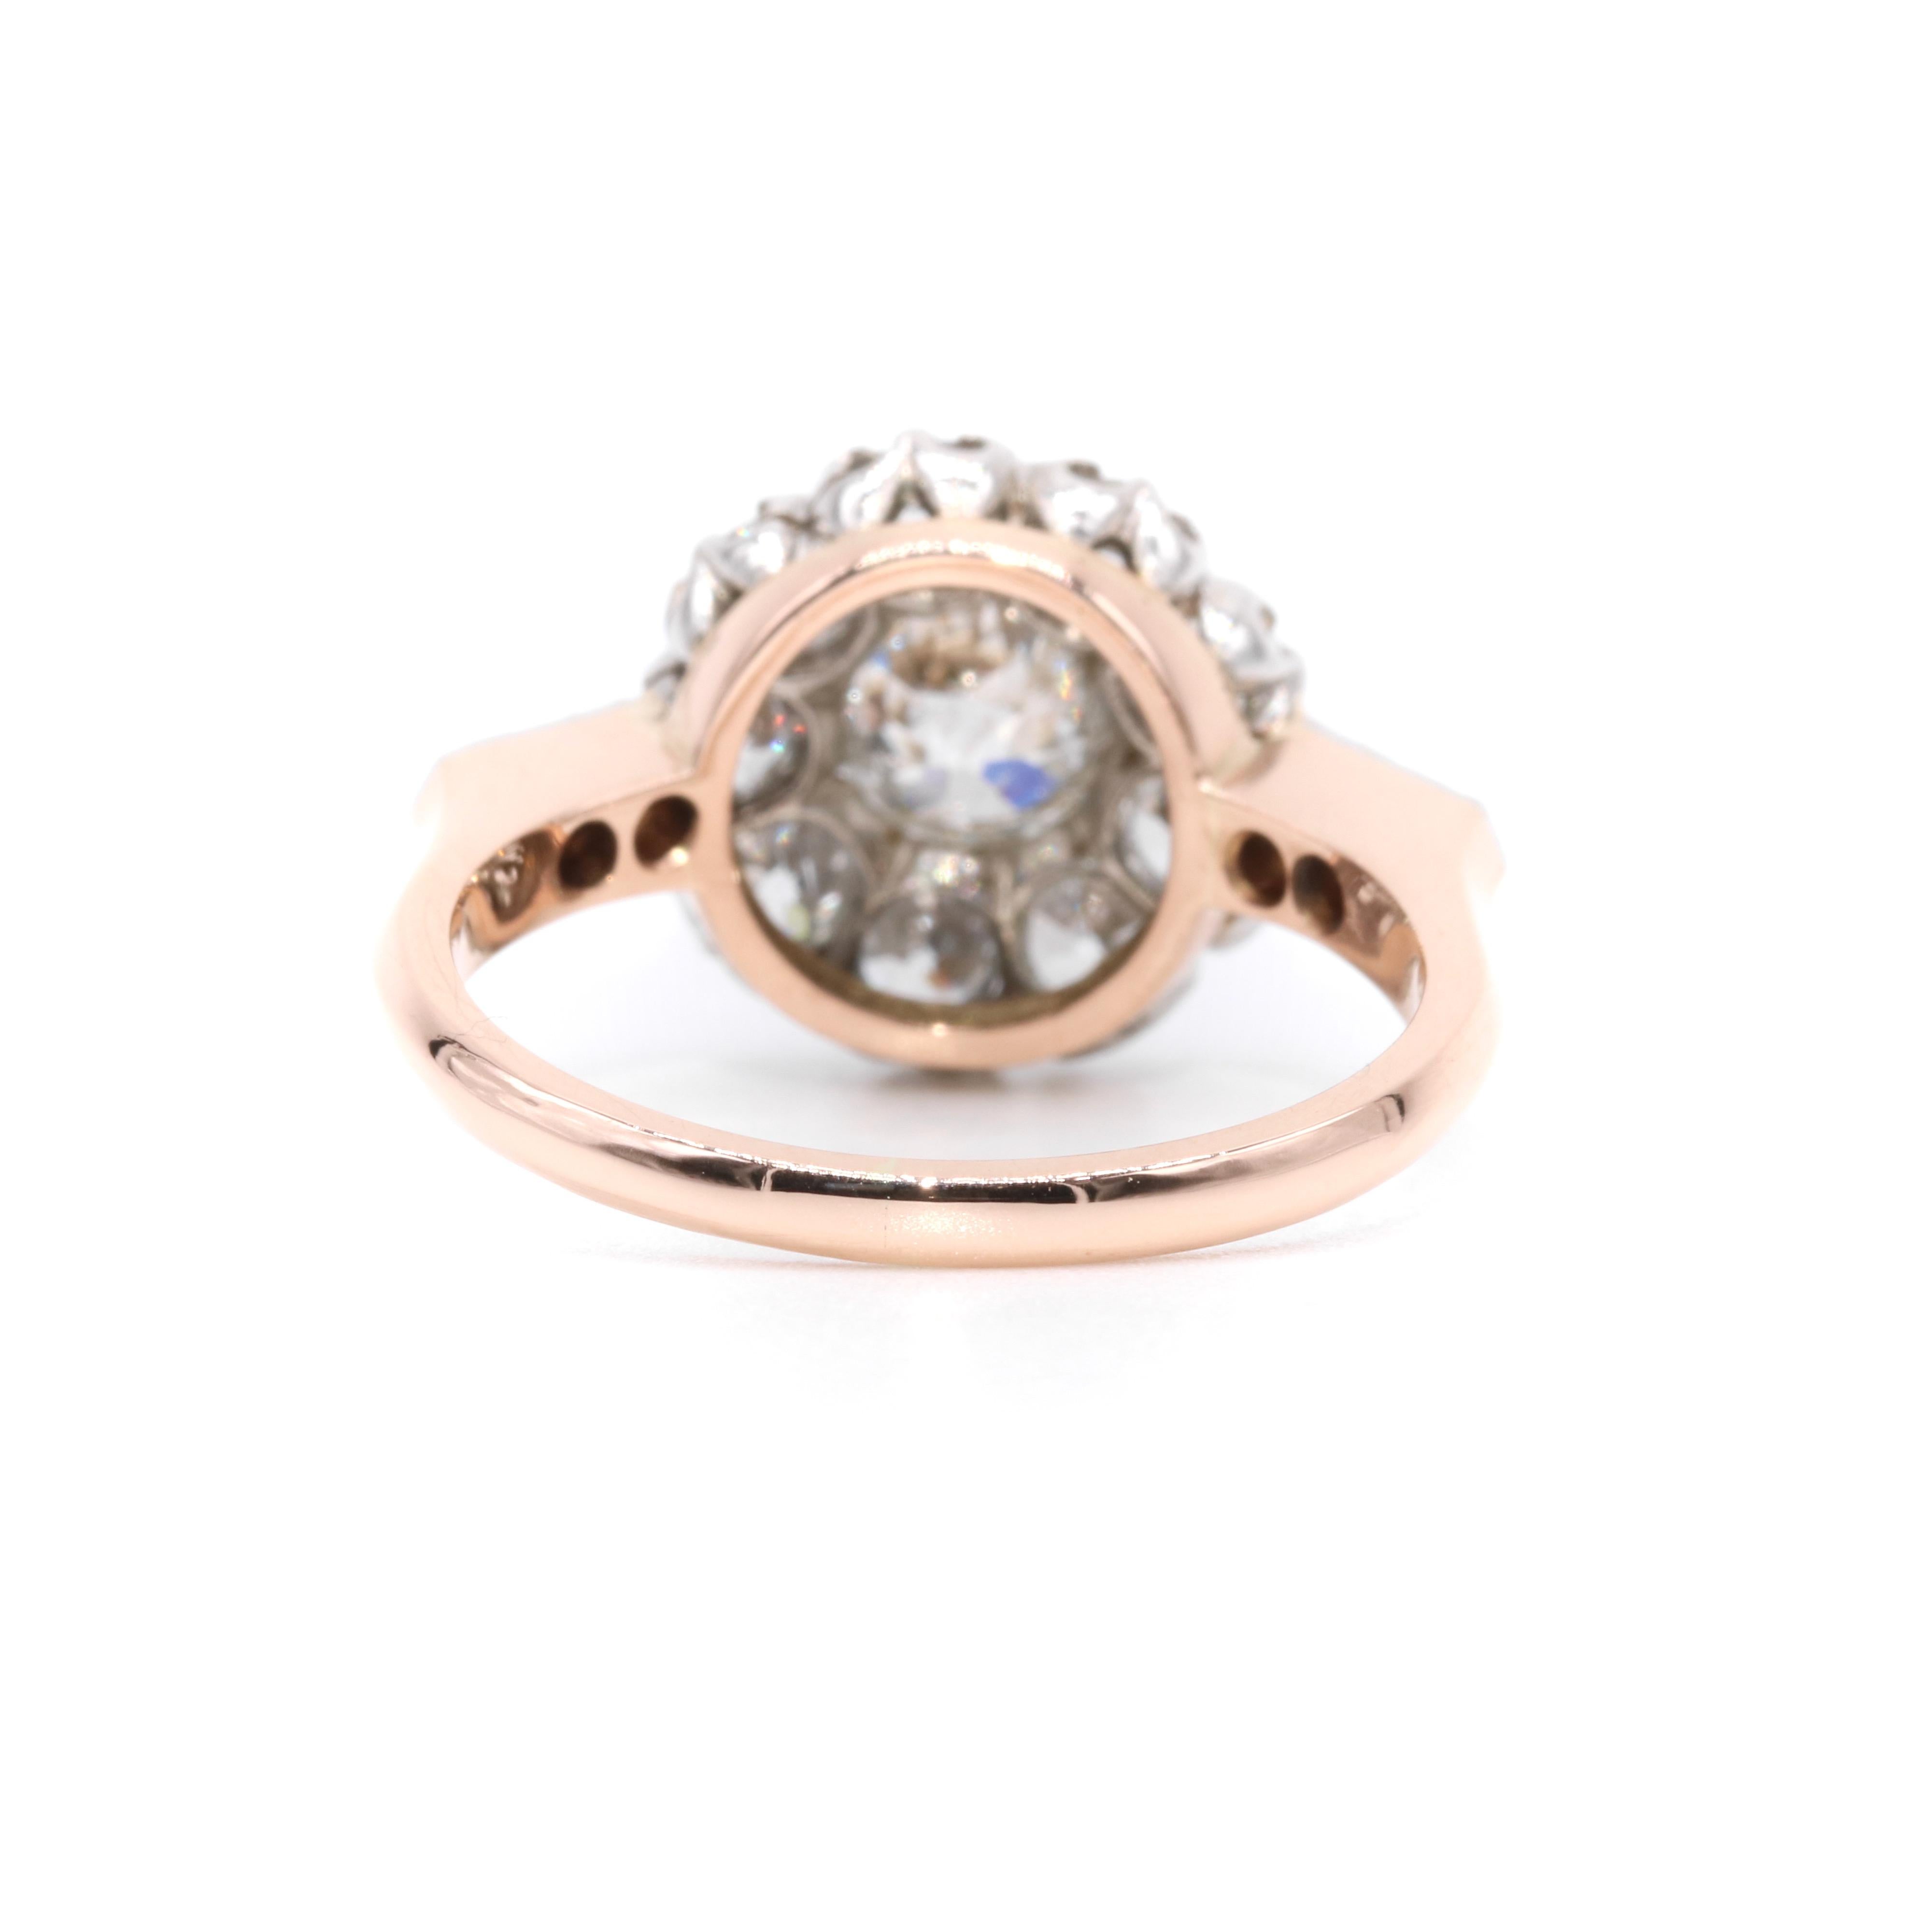 Antique Edwardian 18K Rose Gold and Platinum 1.89ctw Diamond Daisy Cluster Ring For Sale 2